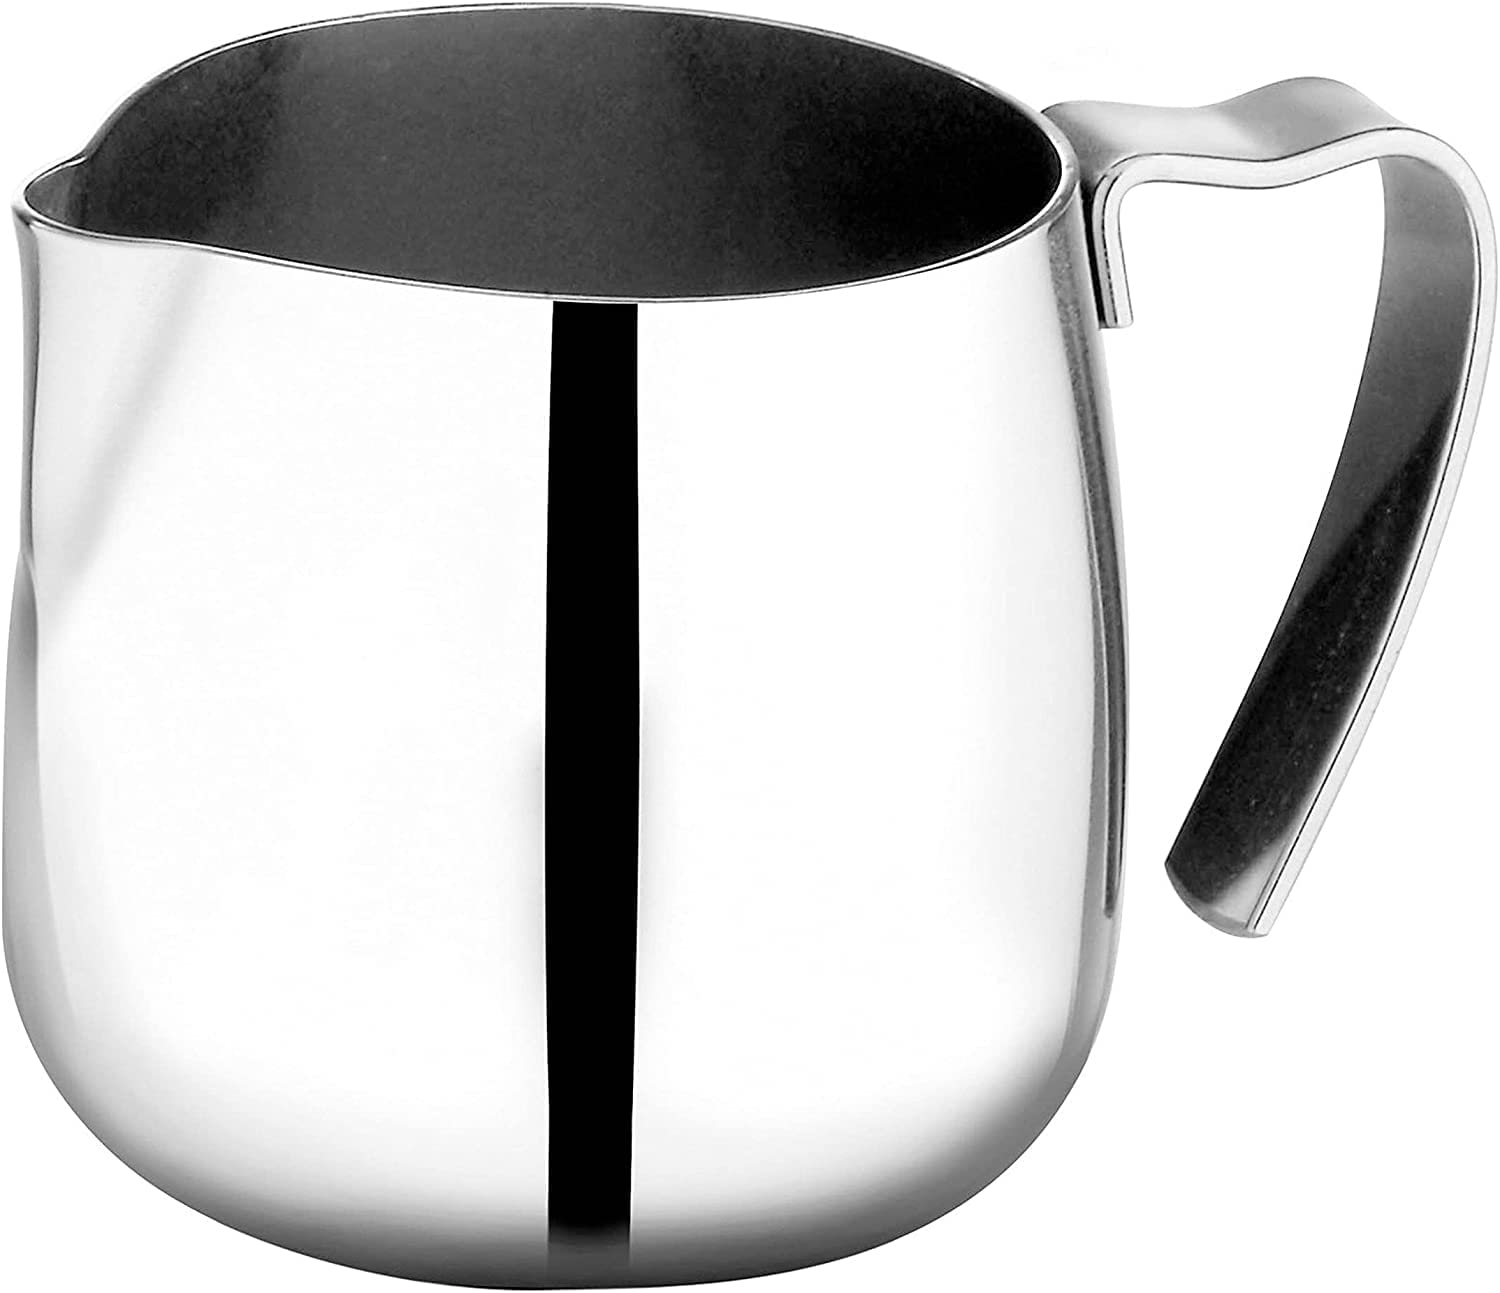 Stainless Steel Milk Jug Special Latte Capuccino Art Spout - Made In Italy By Motta (70 ML)